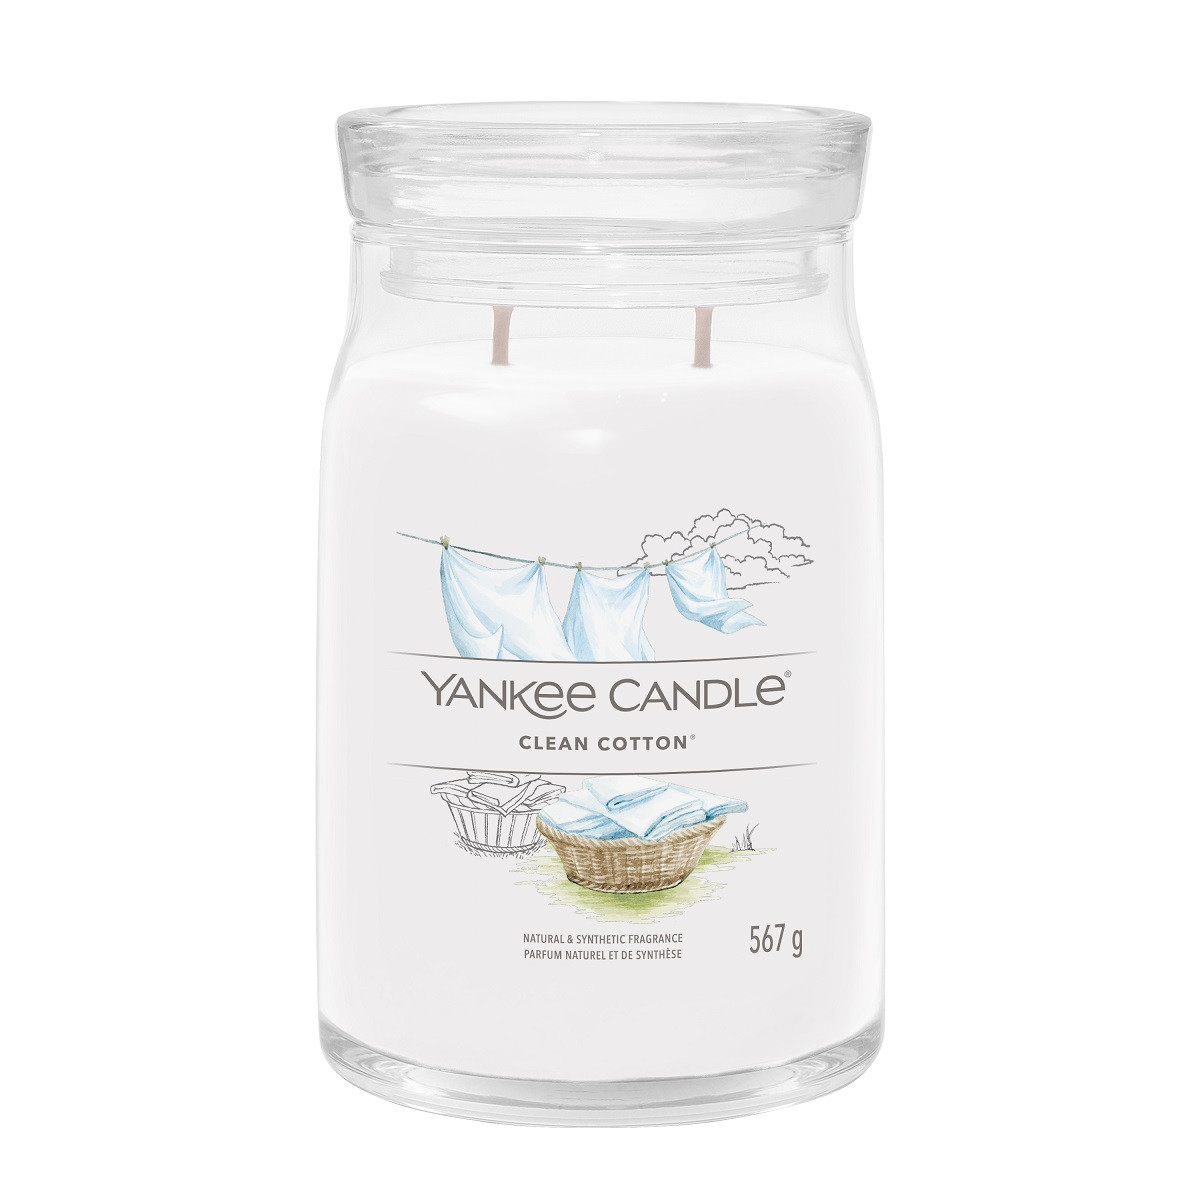 https://www.duftundraum.de/media/image/product/14018/lg/yankee-candle-clean-cotton-signature-glas-567g.jpg